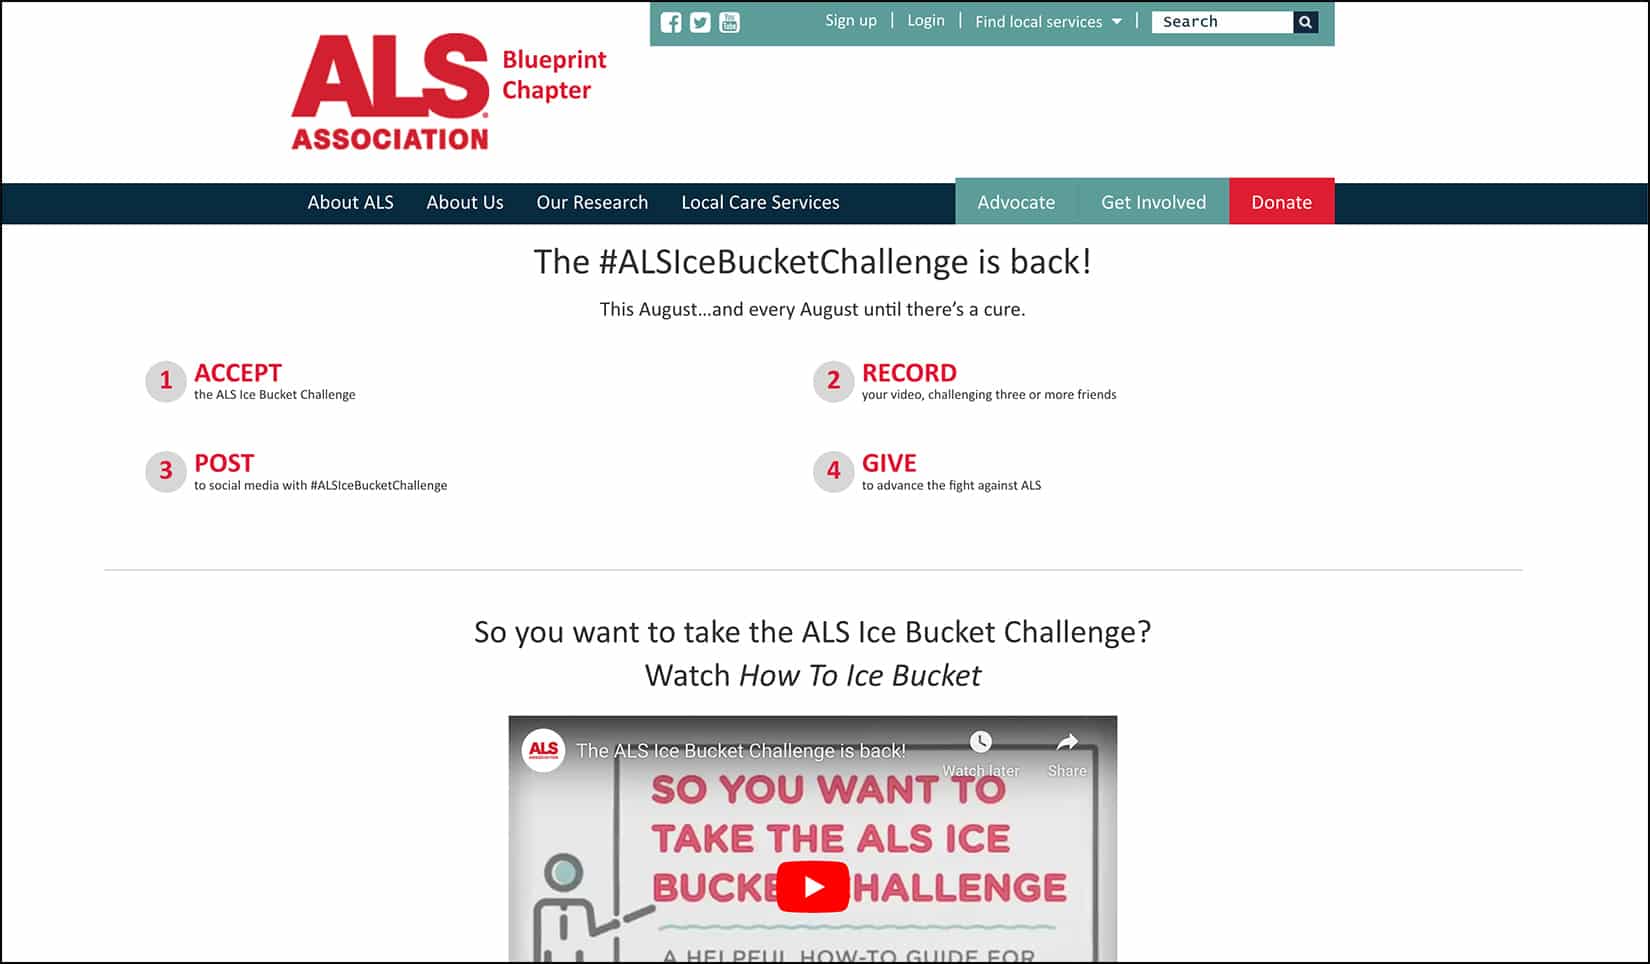 The ALS Ice Bucket Challenge is one of the most famous and successful awareness campaigns to date. 